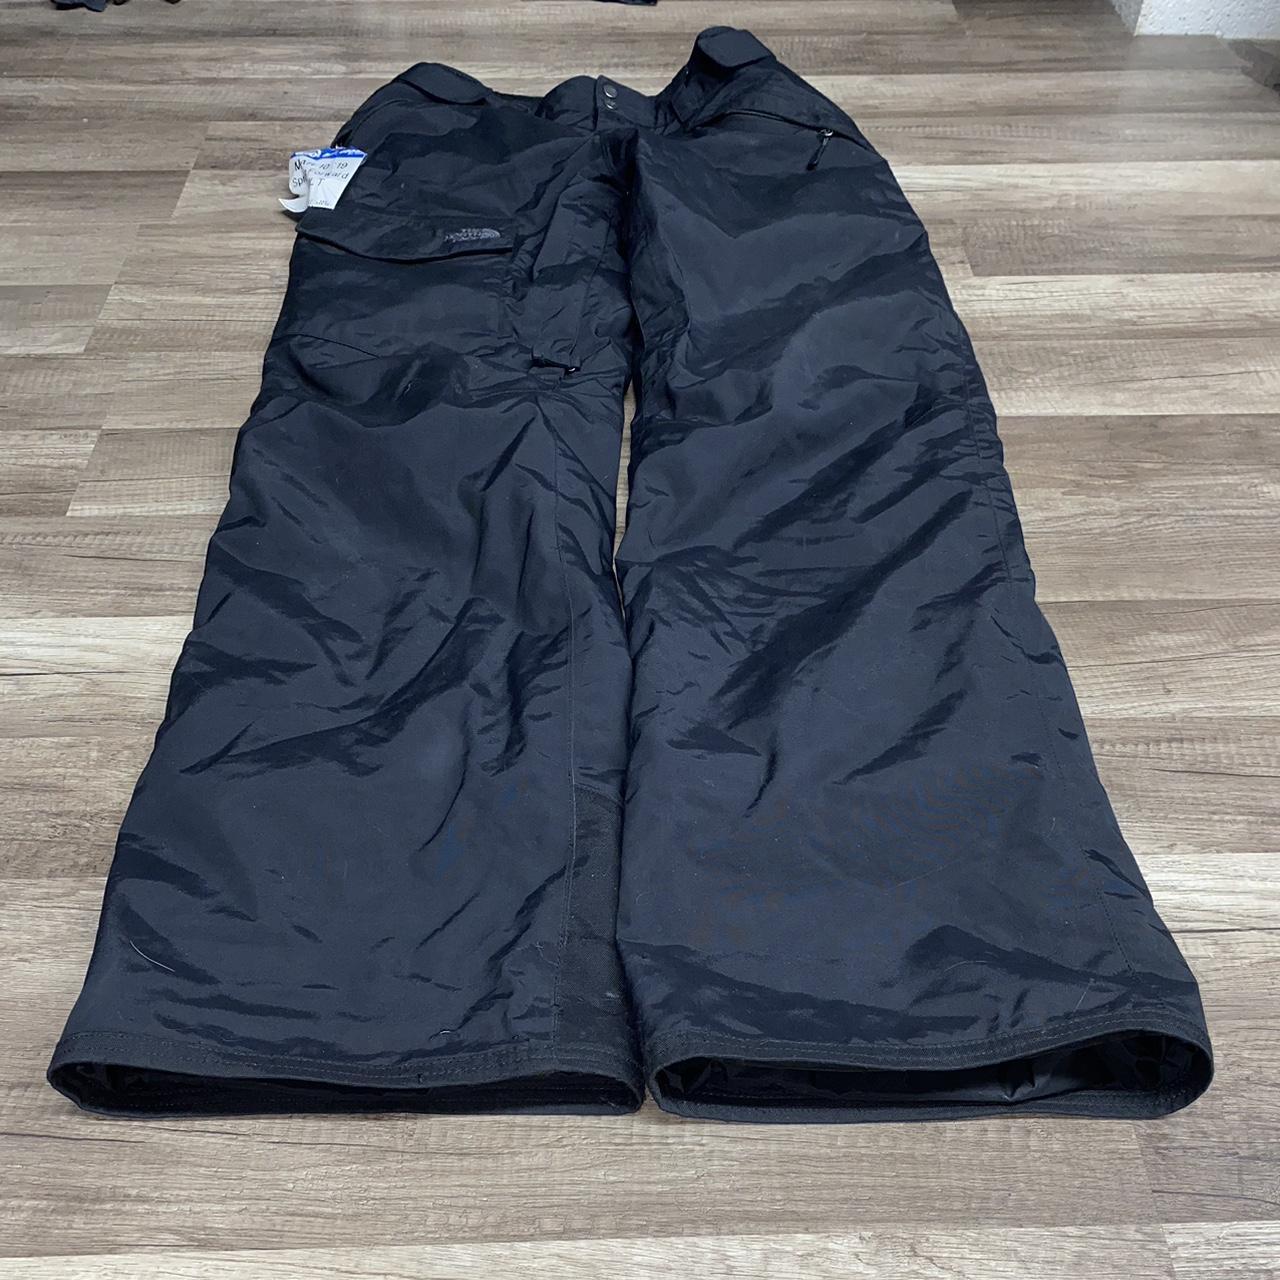 North face snow pants dead stock with zippers on the... - Depop